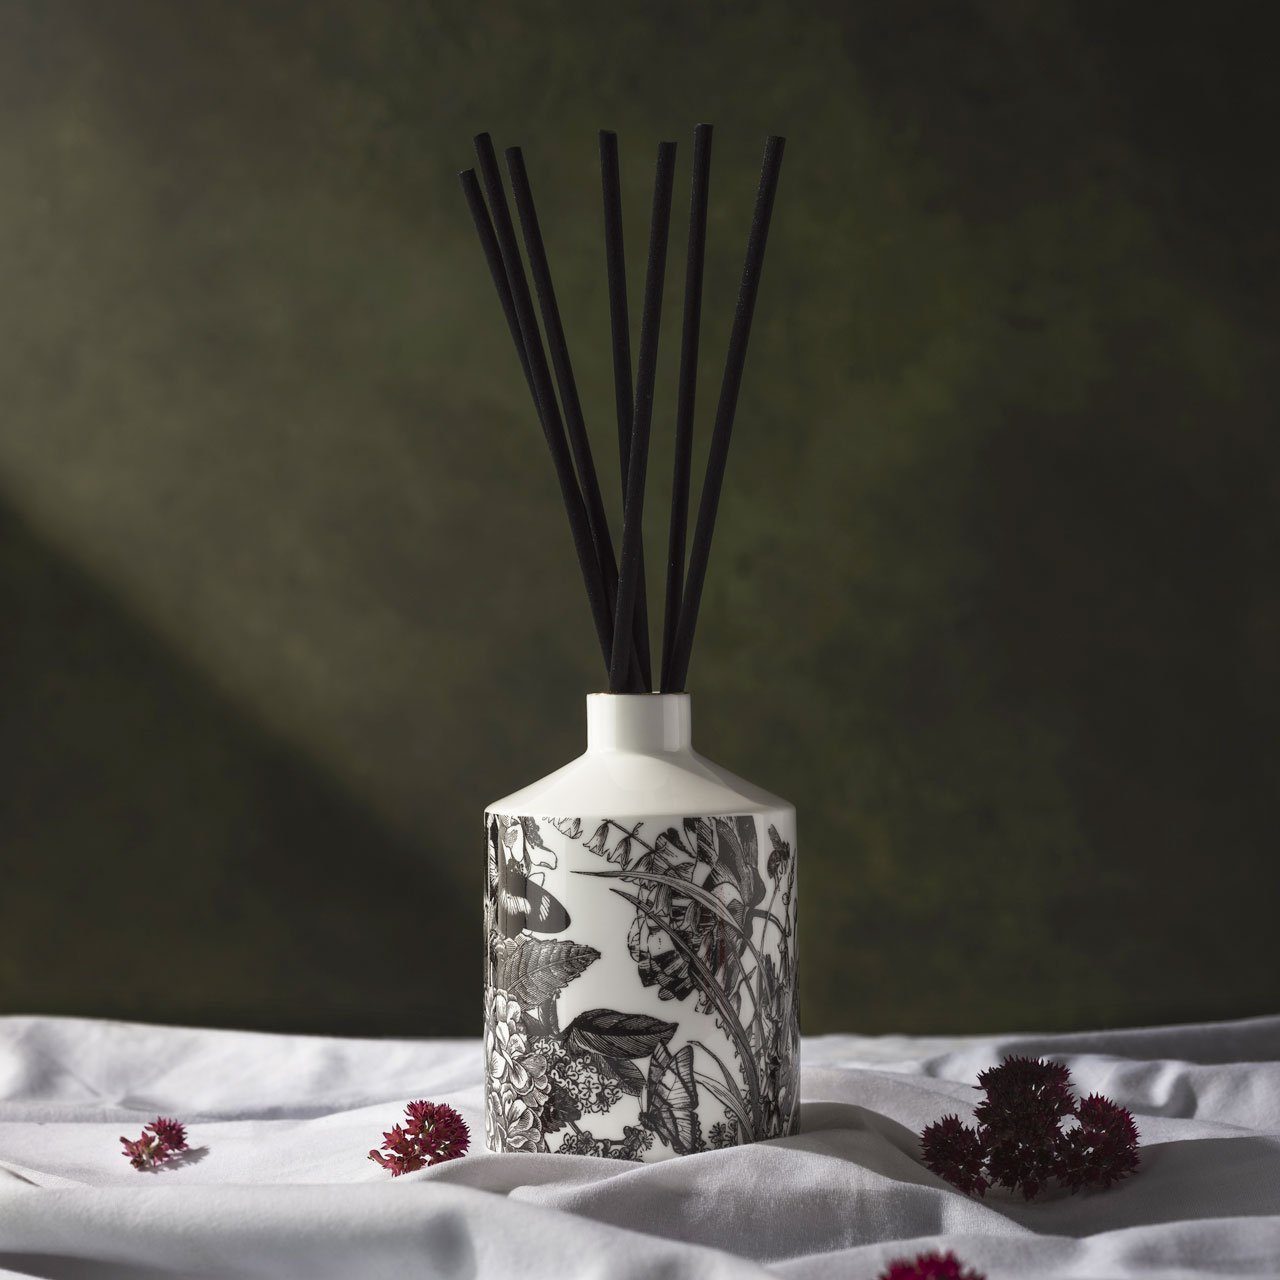 The Country Garden Ceramic Reed Diffuser